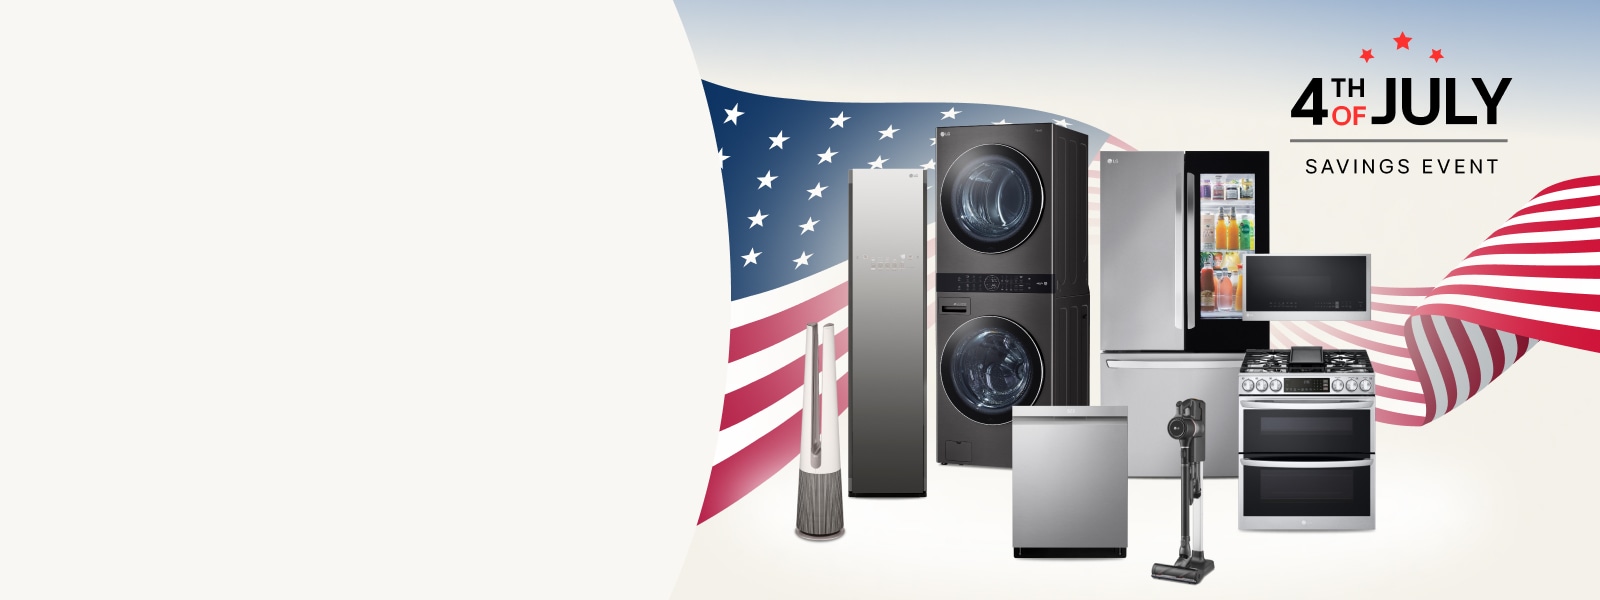 Light up your holiday with up to 25% off appliances